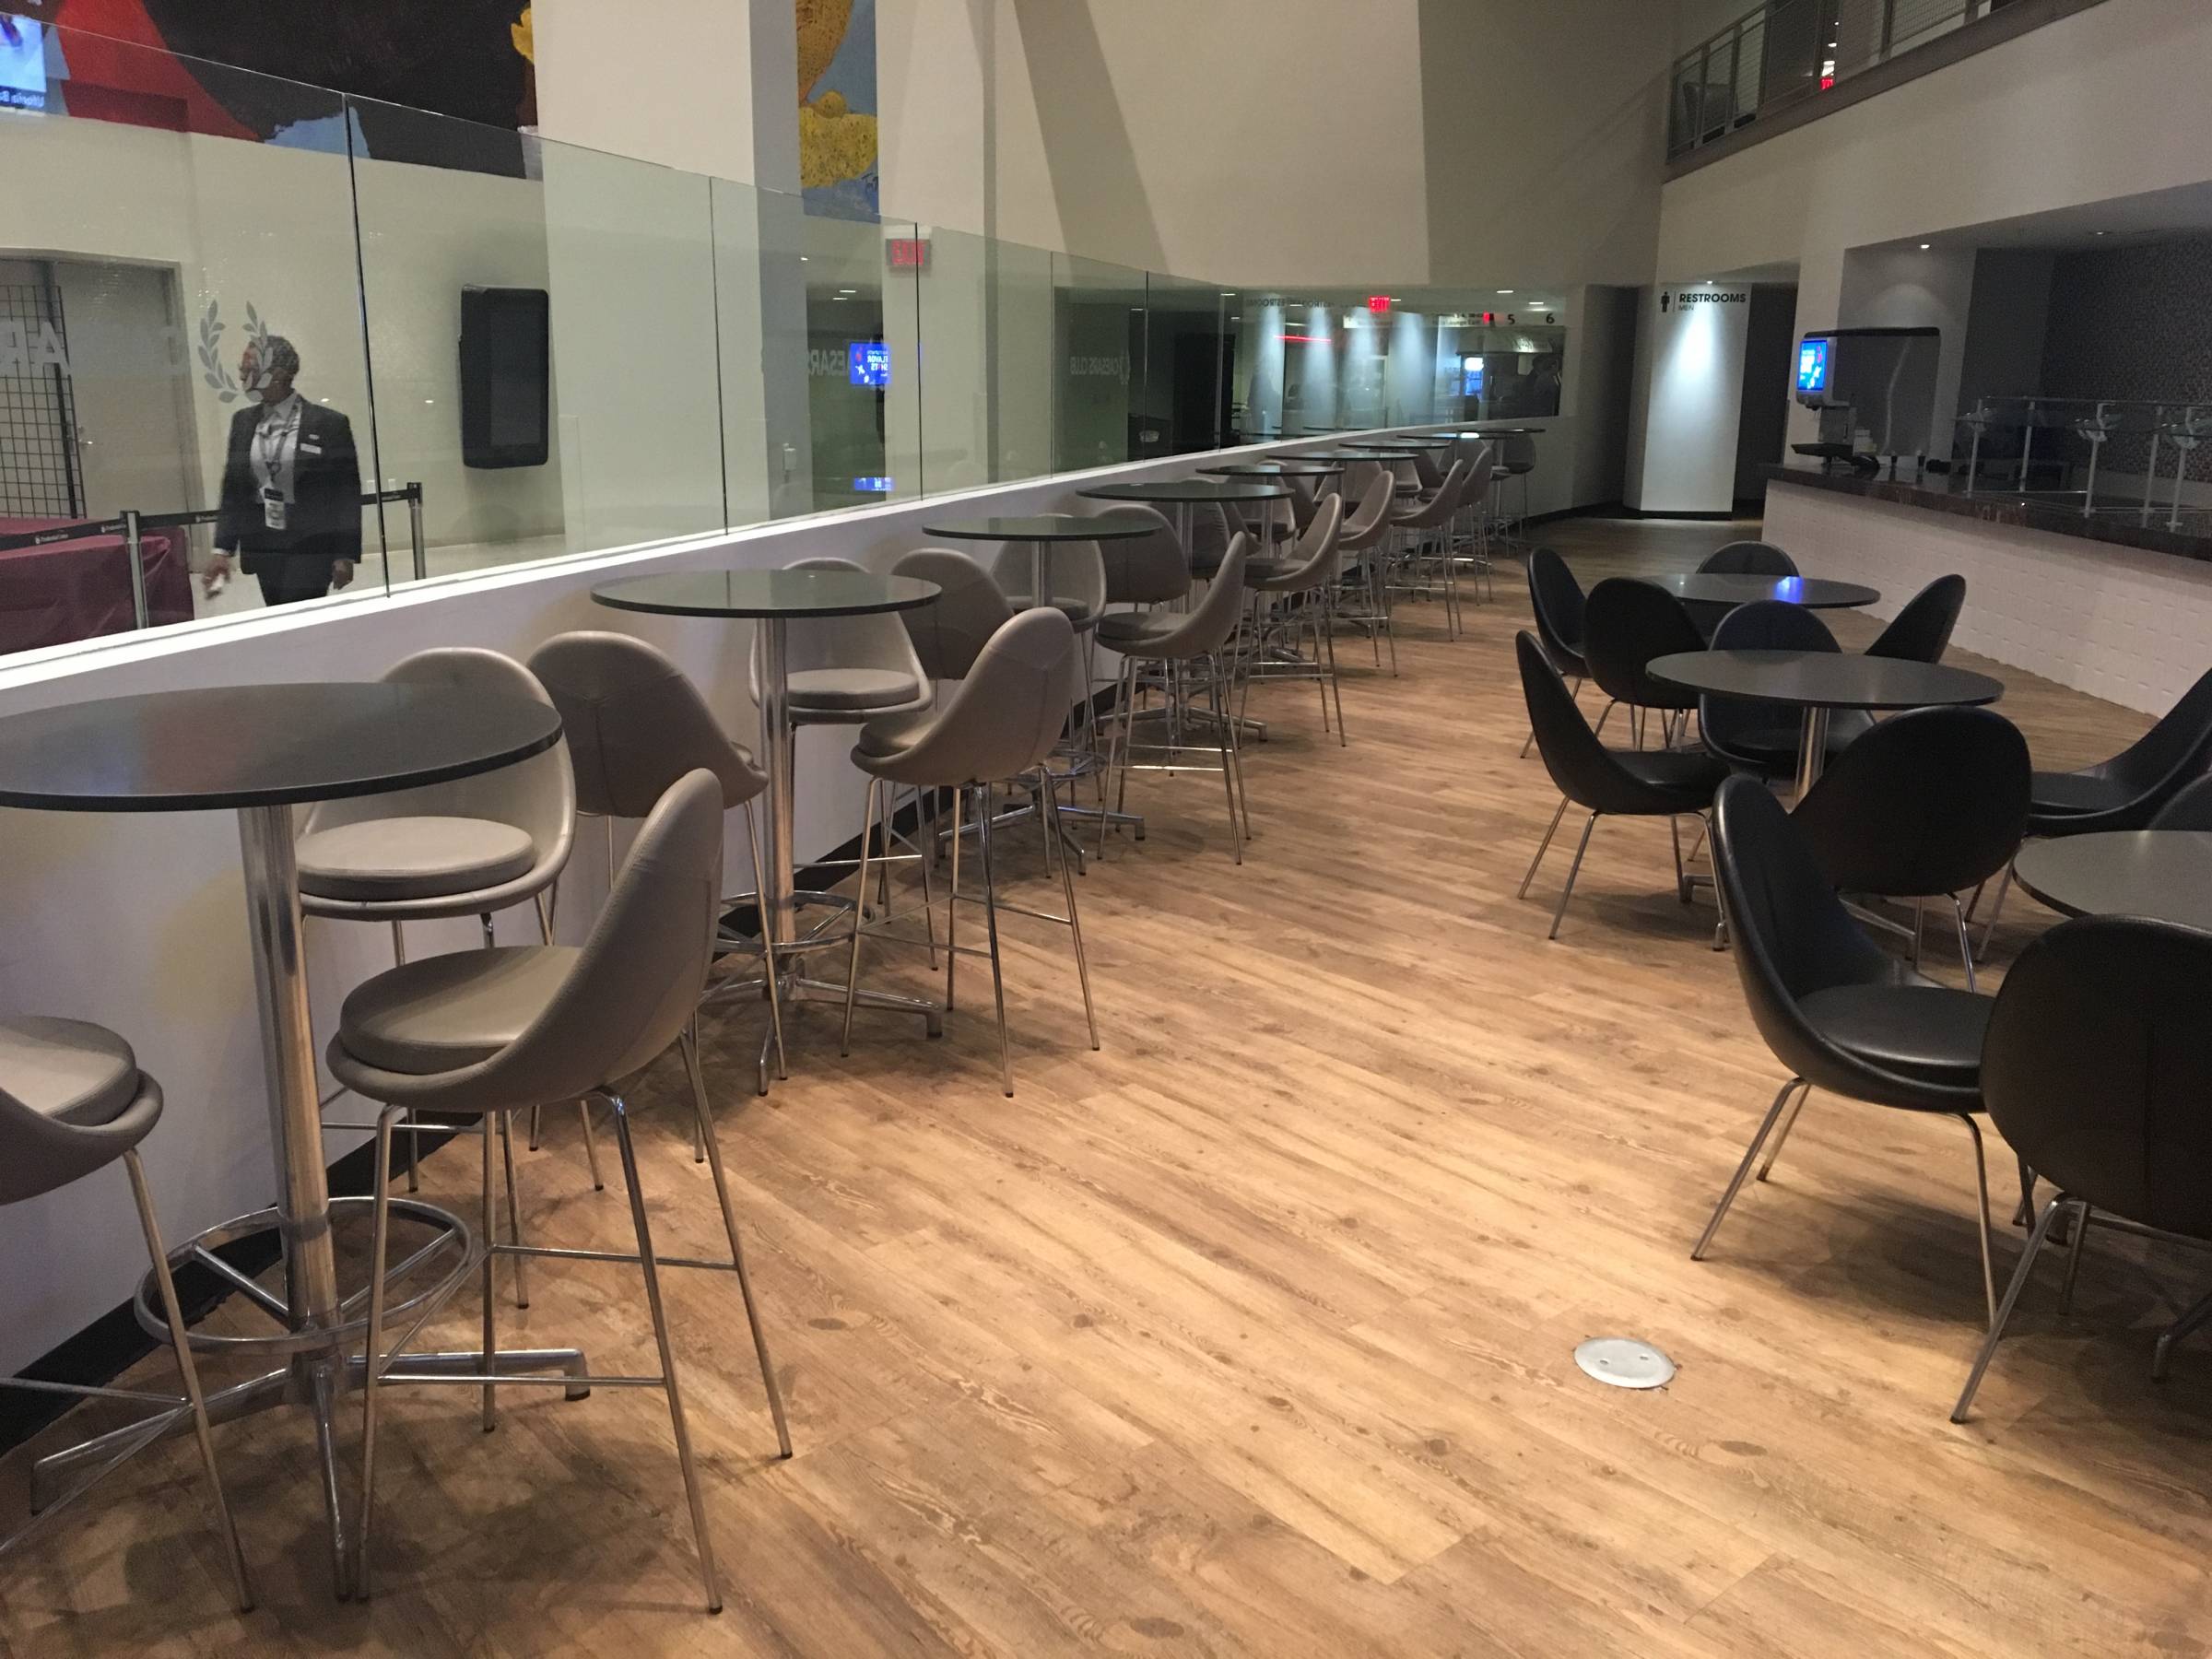 Club Lounges at Prudential Center